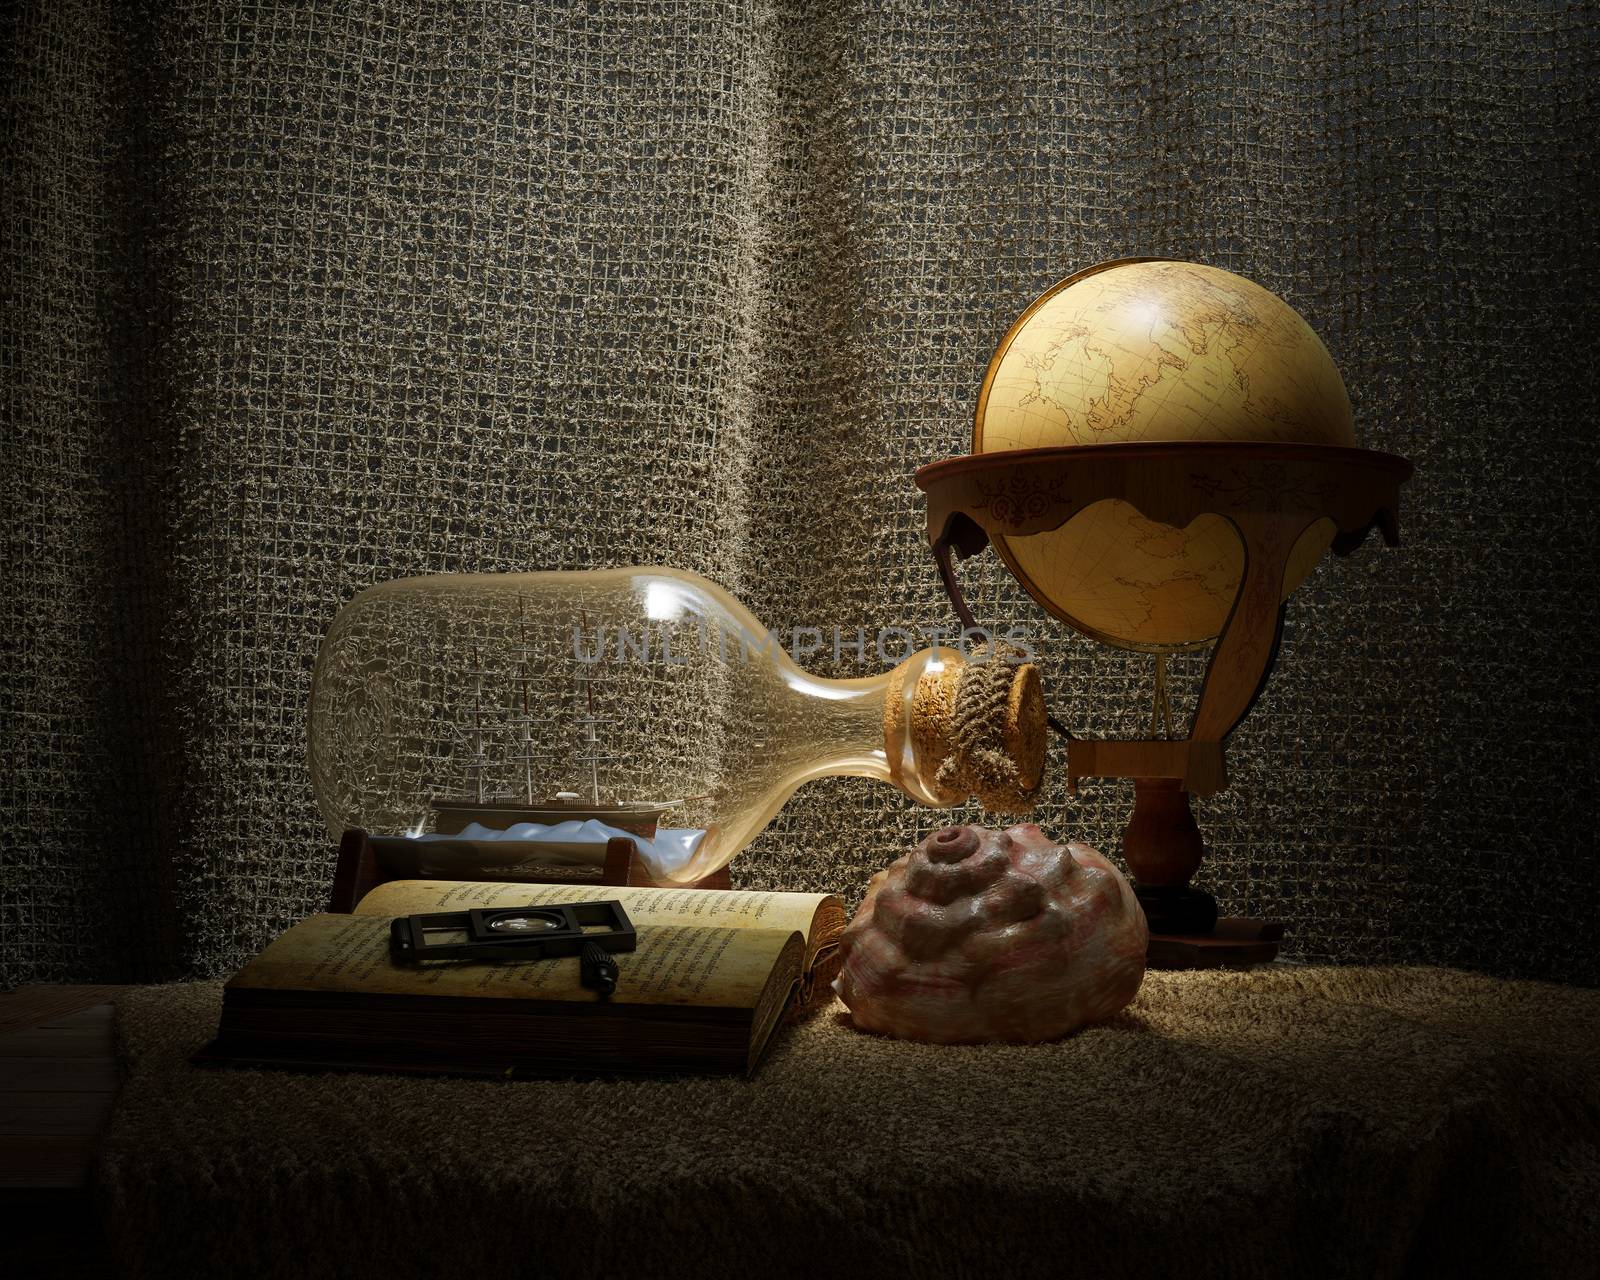 Seashell in interior scene with globe and ship in the bottle concept photo by denisgo